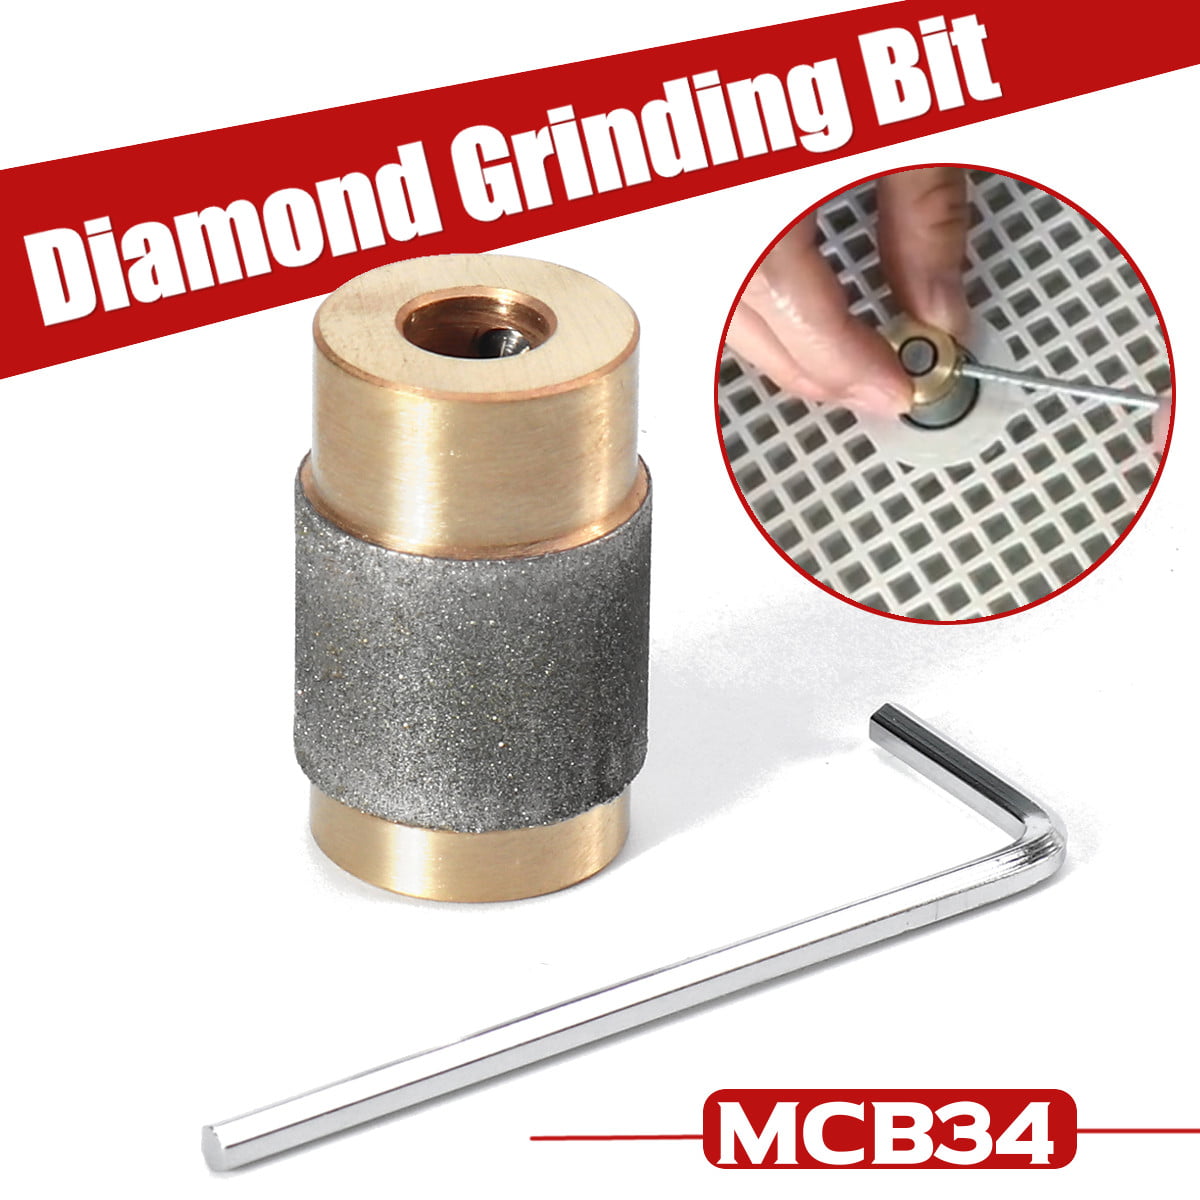 3/4 inch Grinding Bit Xtra Coarse Speed for stained glass 